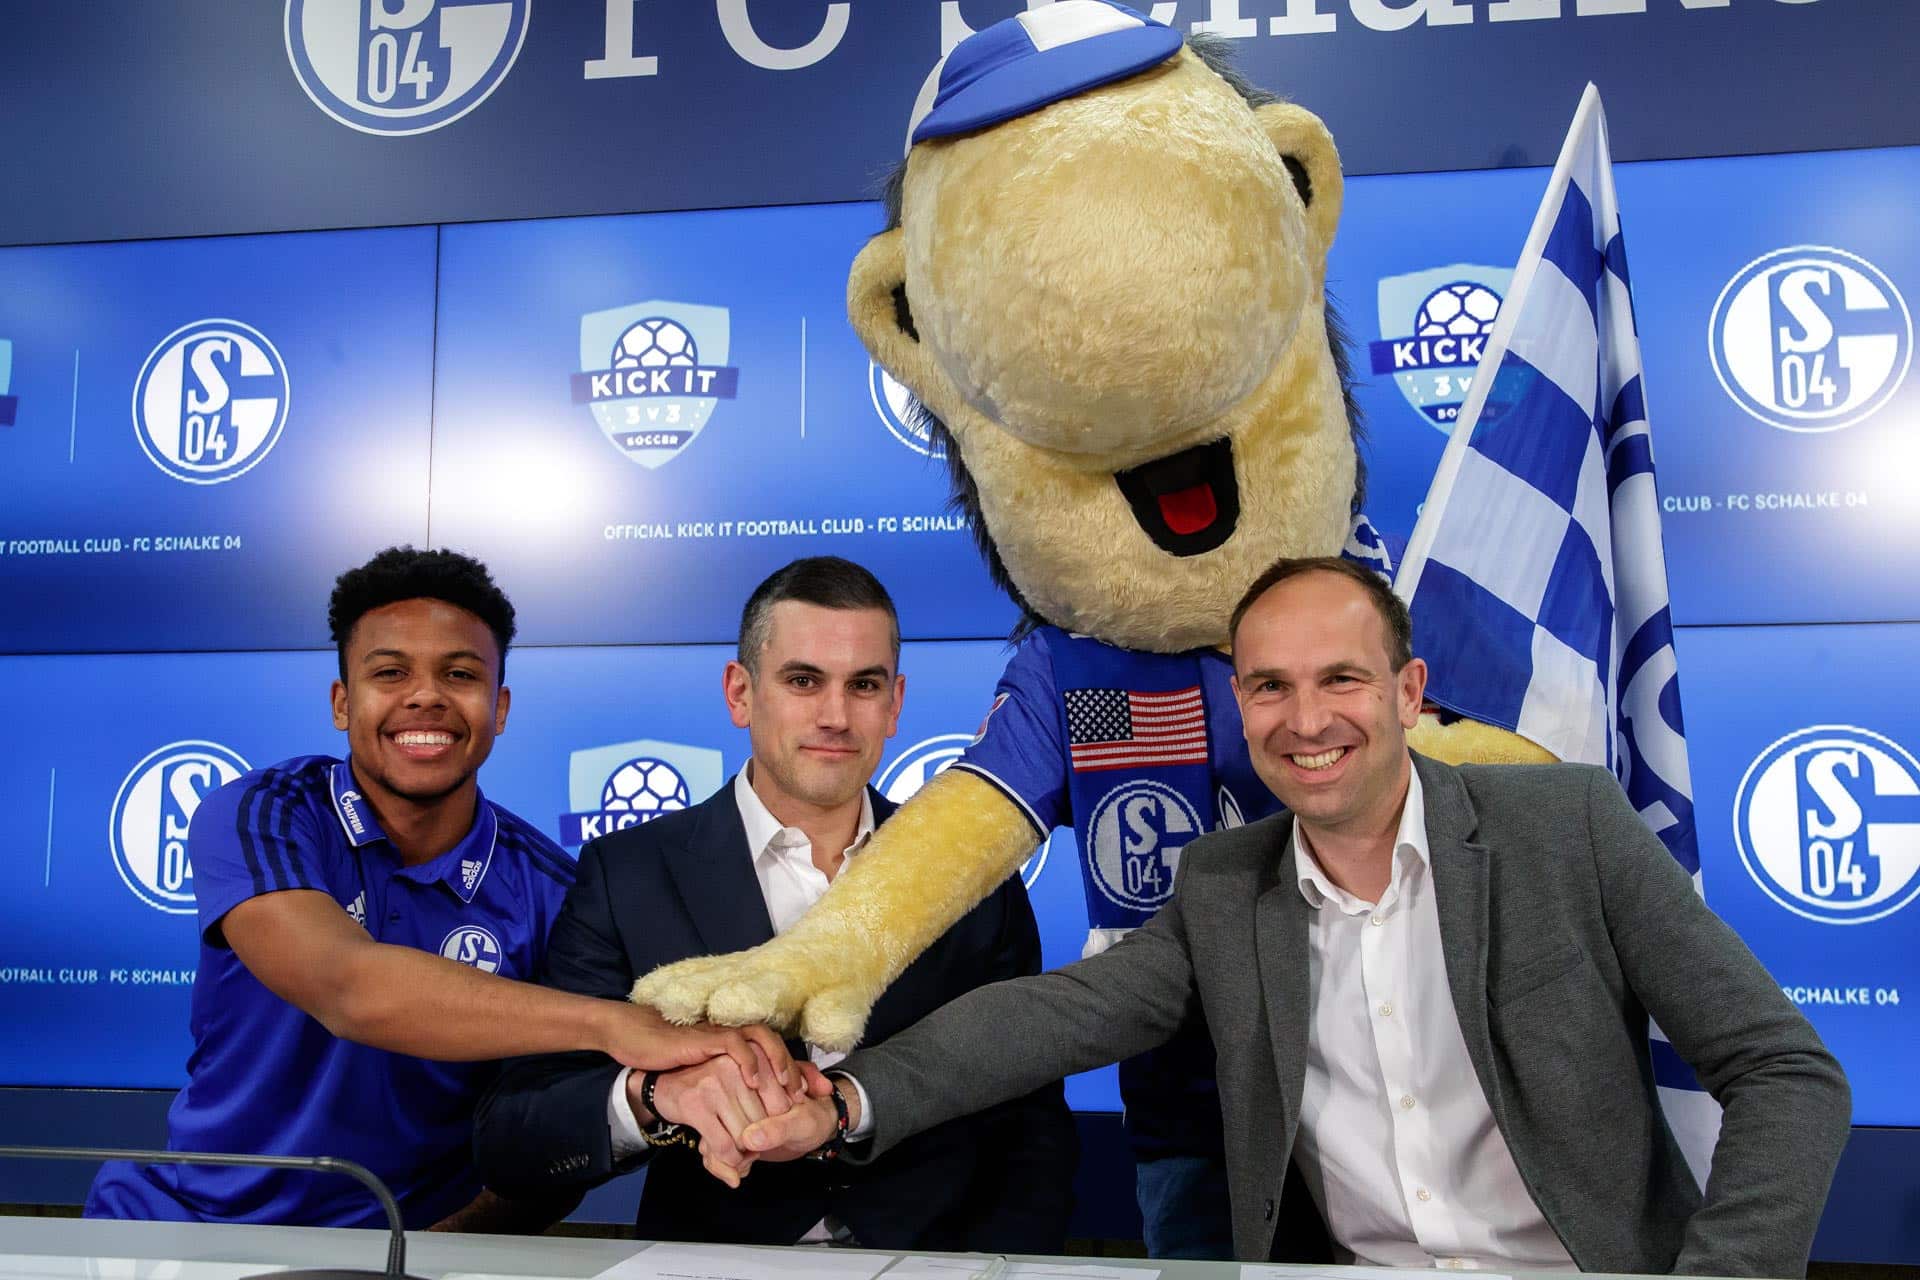 FC Schalke 04 to partner with KICK IT | FirstTouchOnline.com